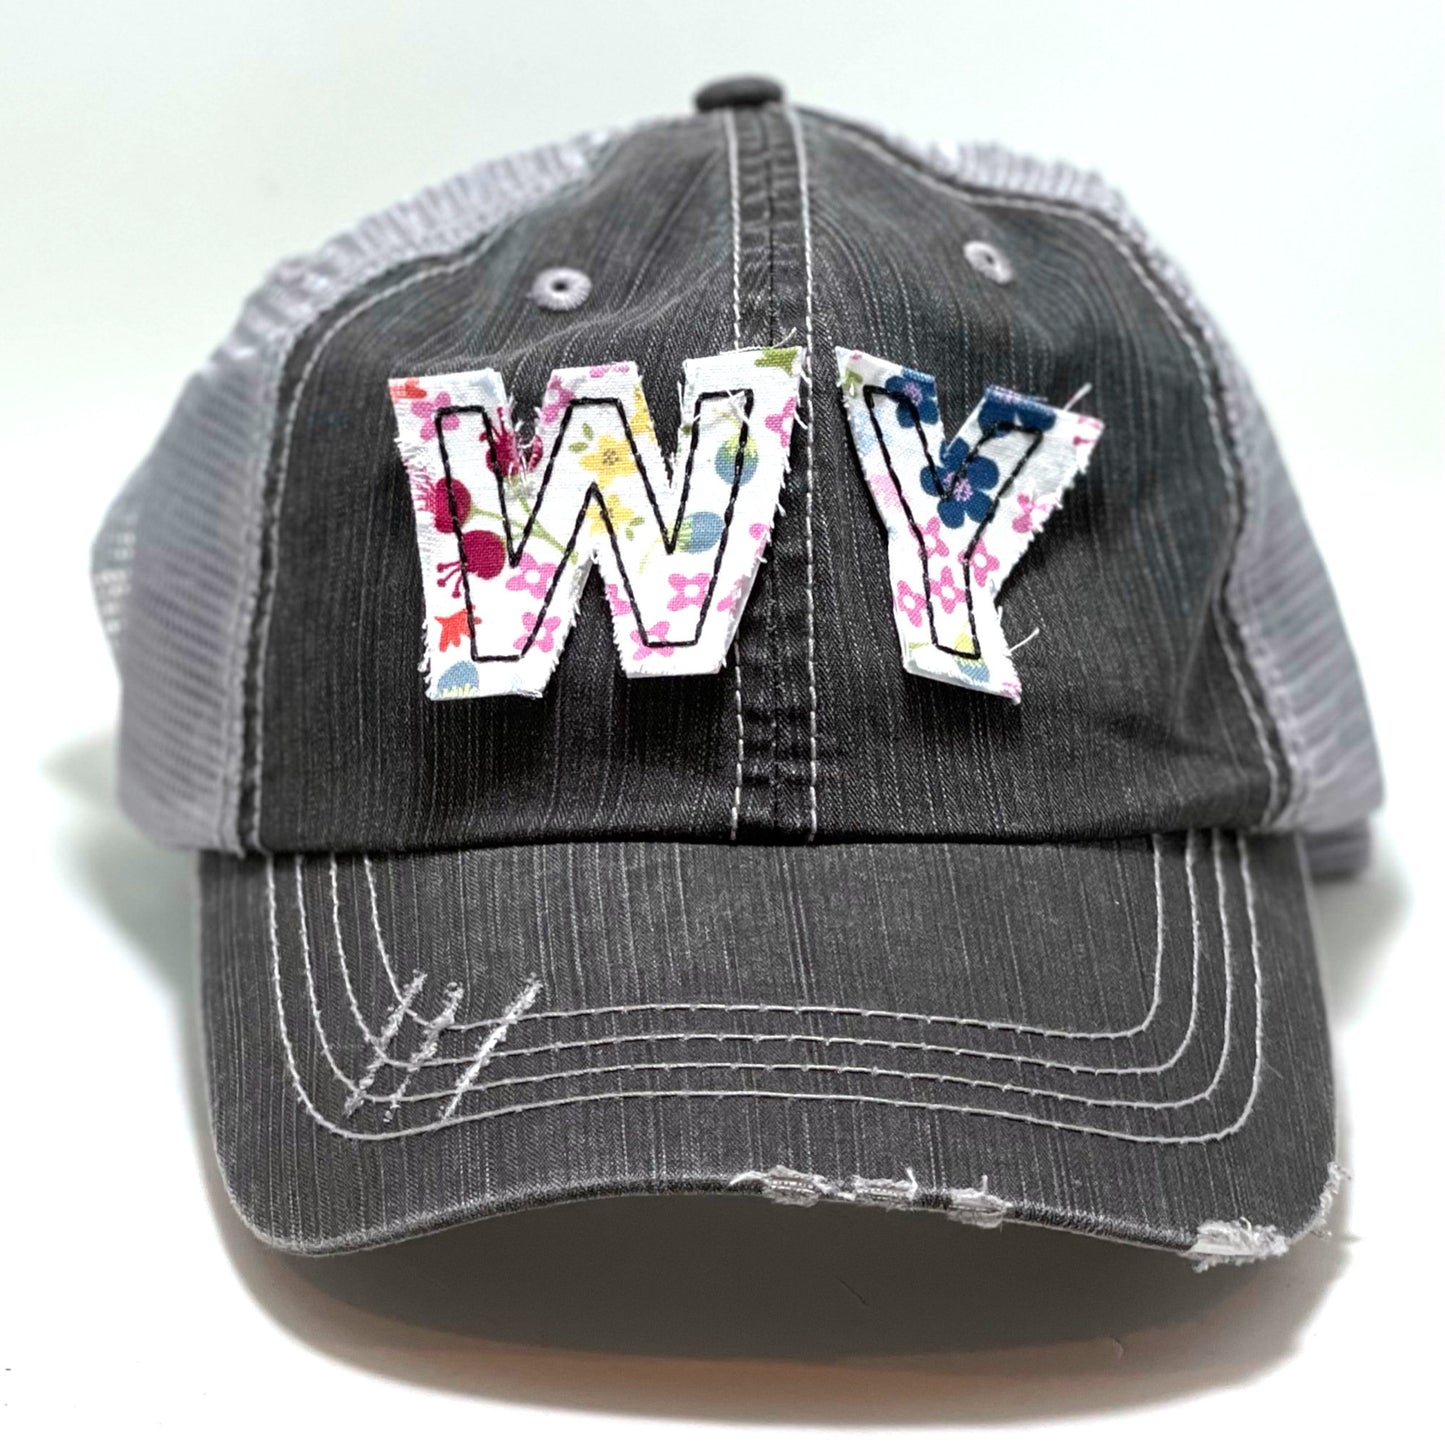 gray distressed trucker hat with gray floral fabric state of Wyoming